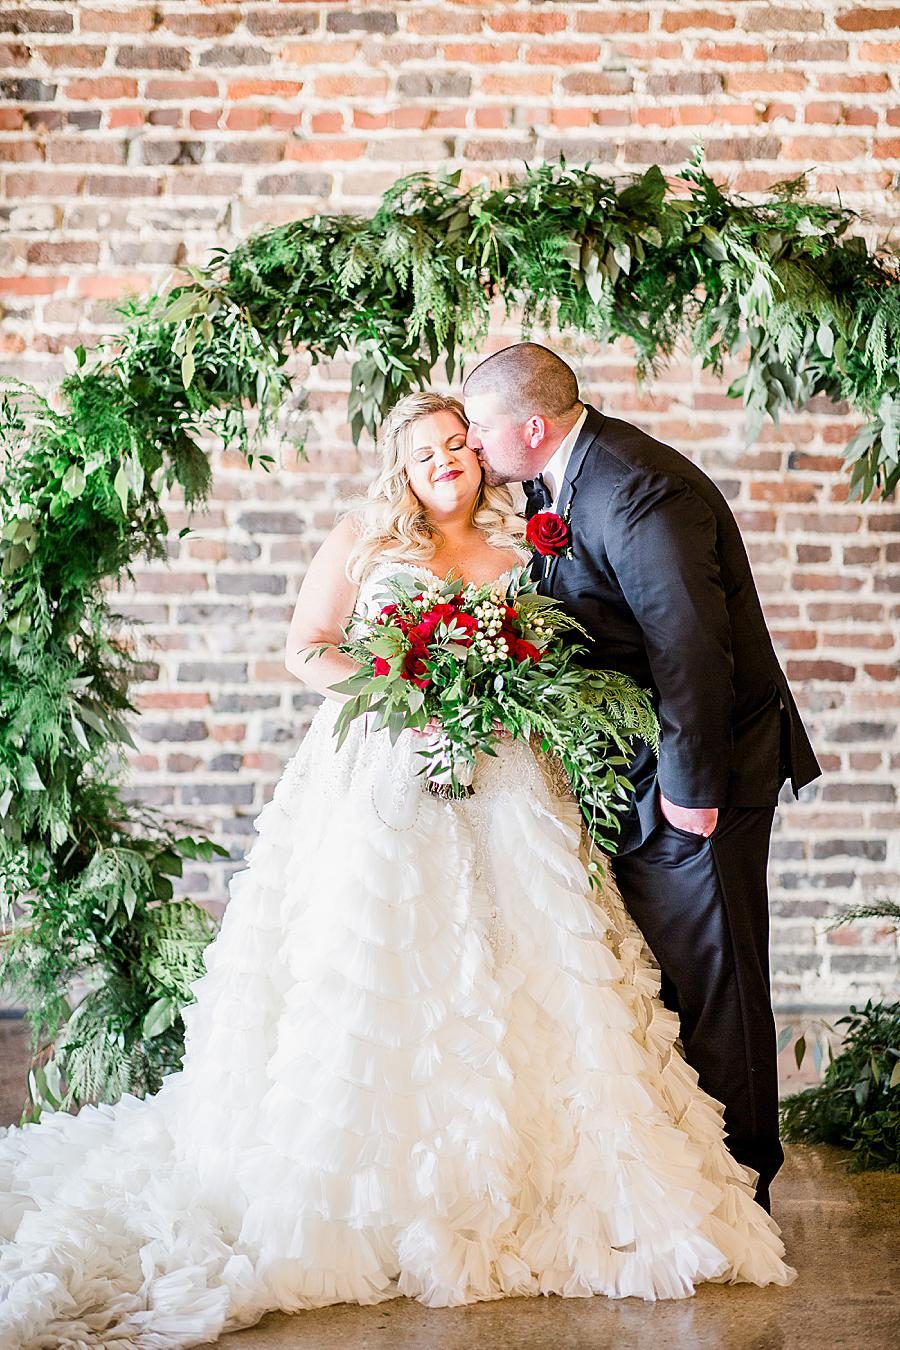 Kiss on the cheek at this The Press Room Wedding by Knoxville Wedding Photographer, Amanda May Photos.